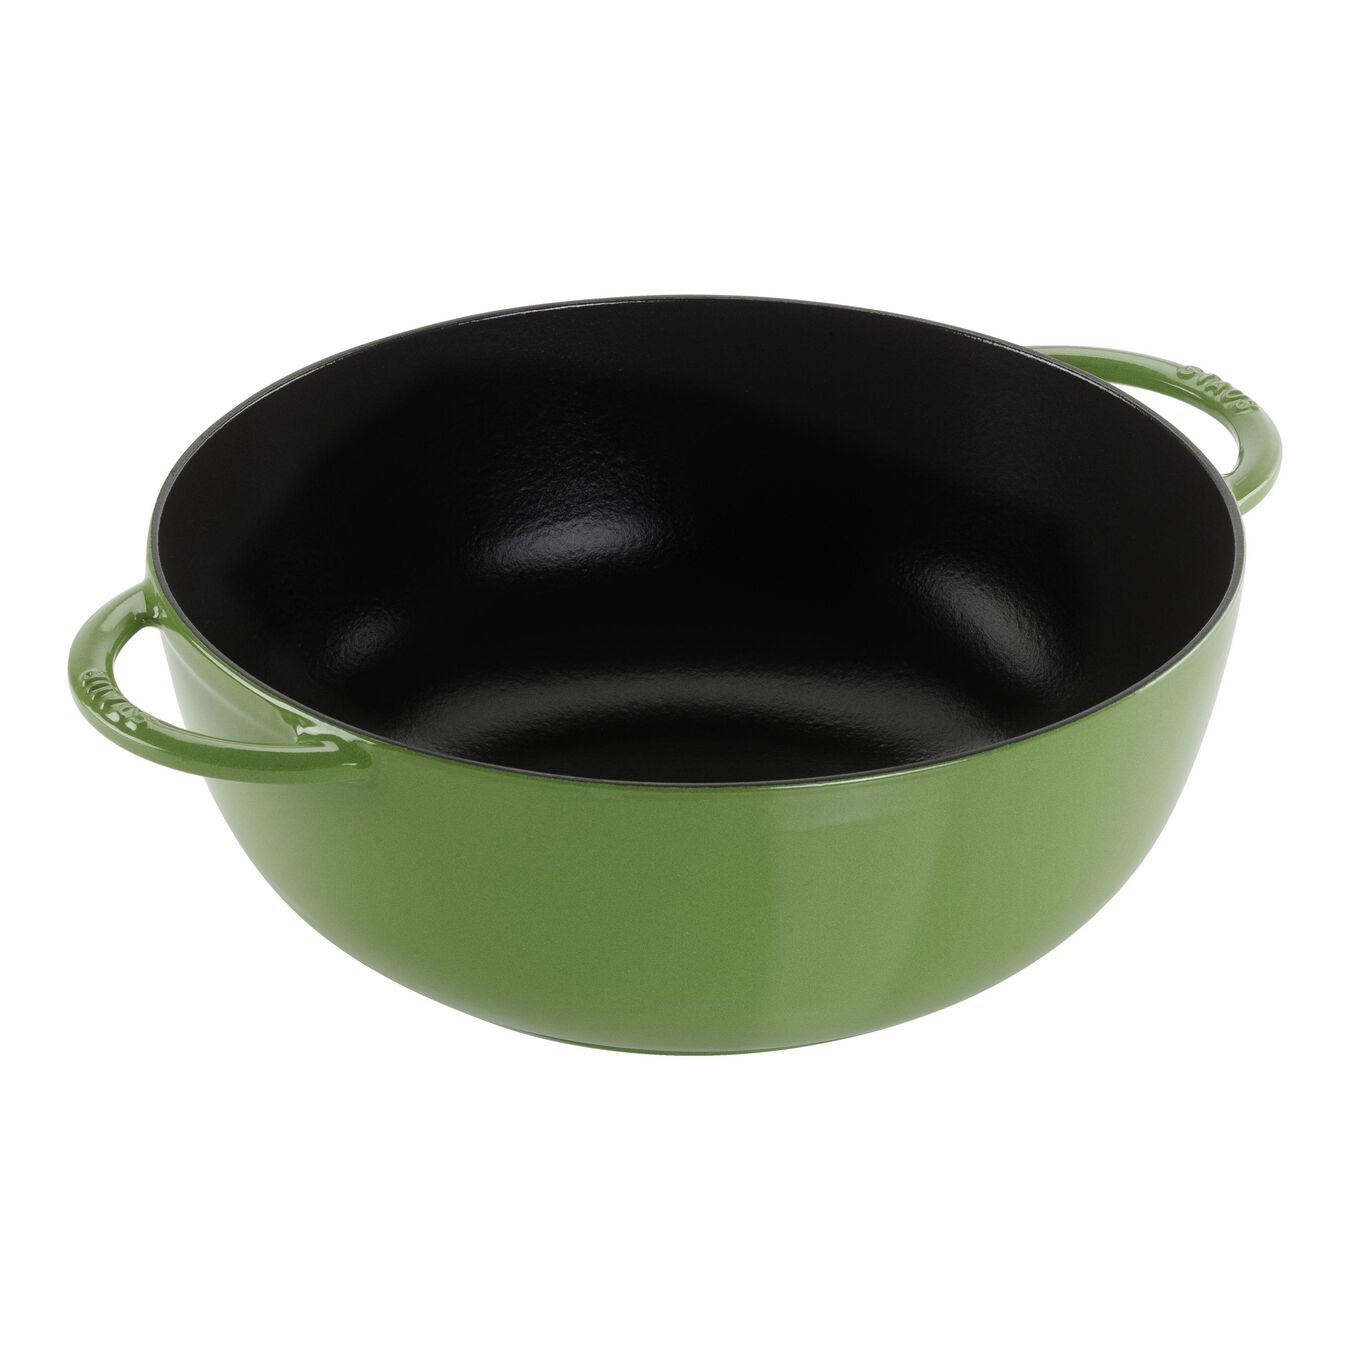 12.5-inch, Wok, lime green,,large 1